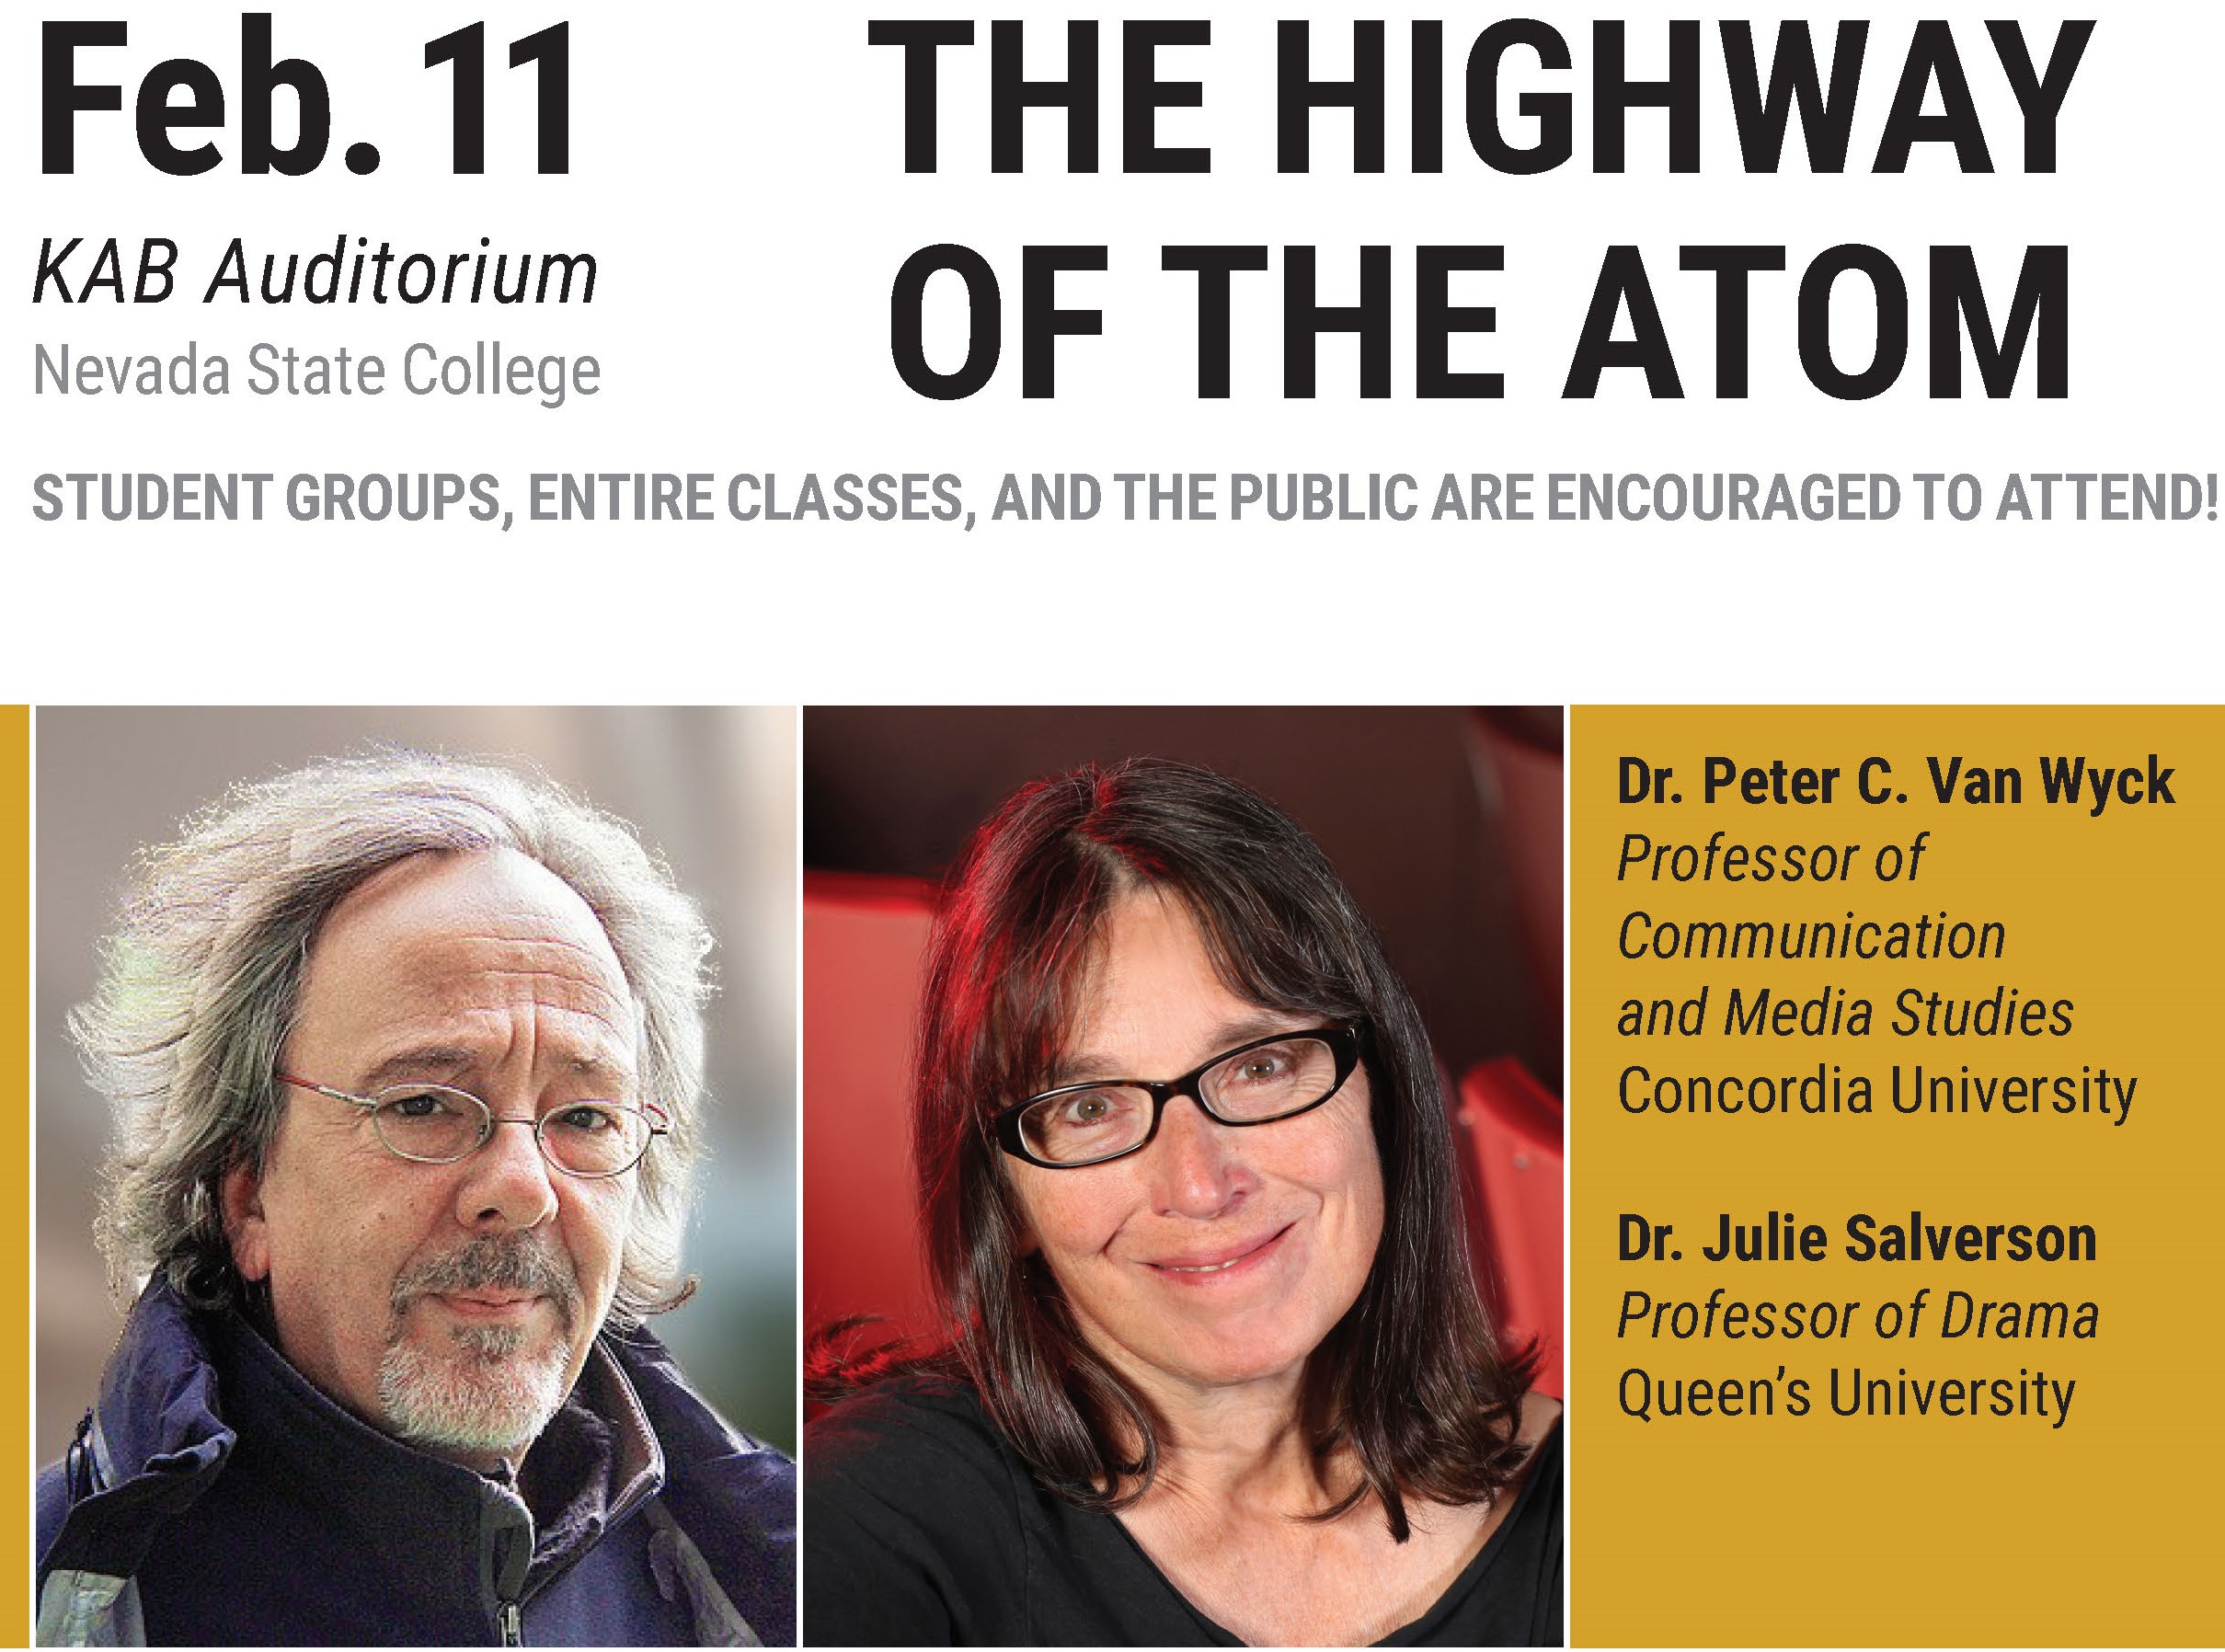 Feb. 11 The Highway of the Atom Seminar with Dr. Peter C. Van Wyck and Dr. Julie Salverson